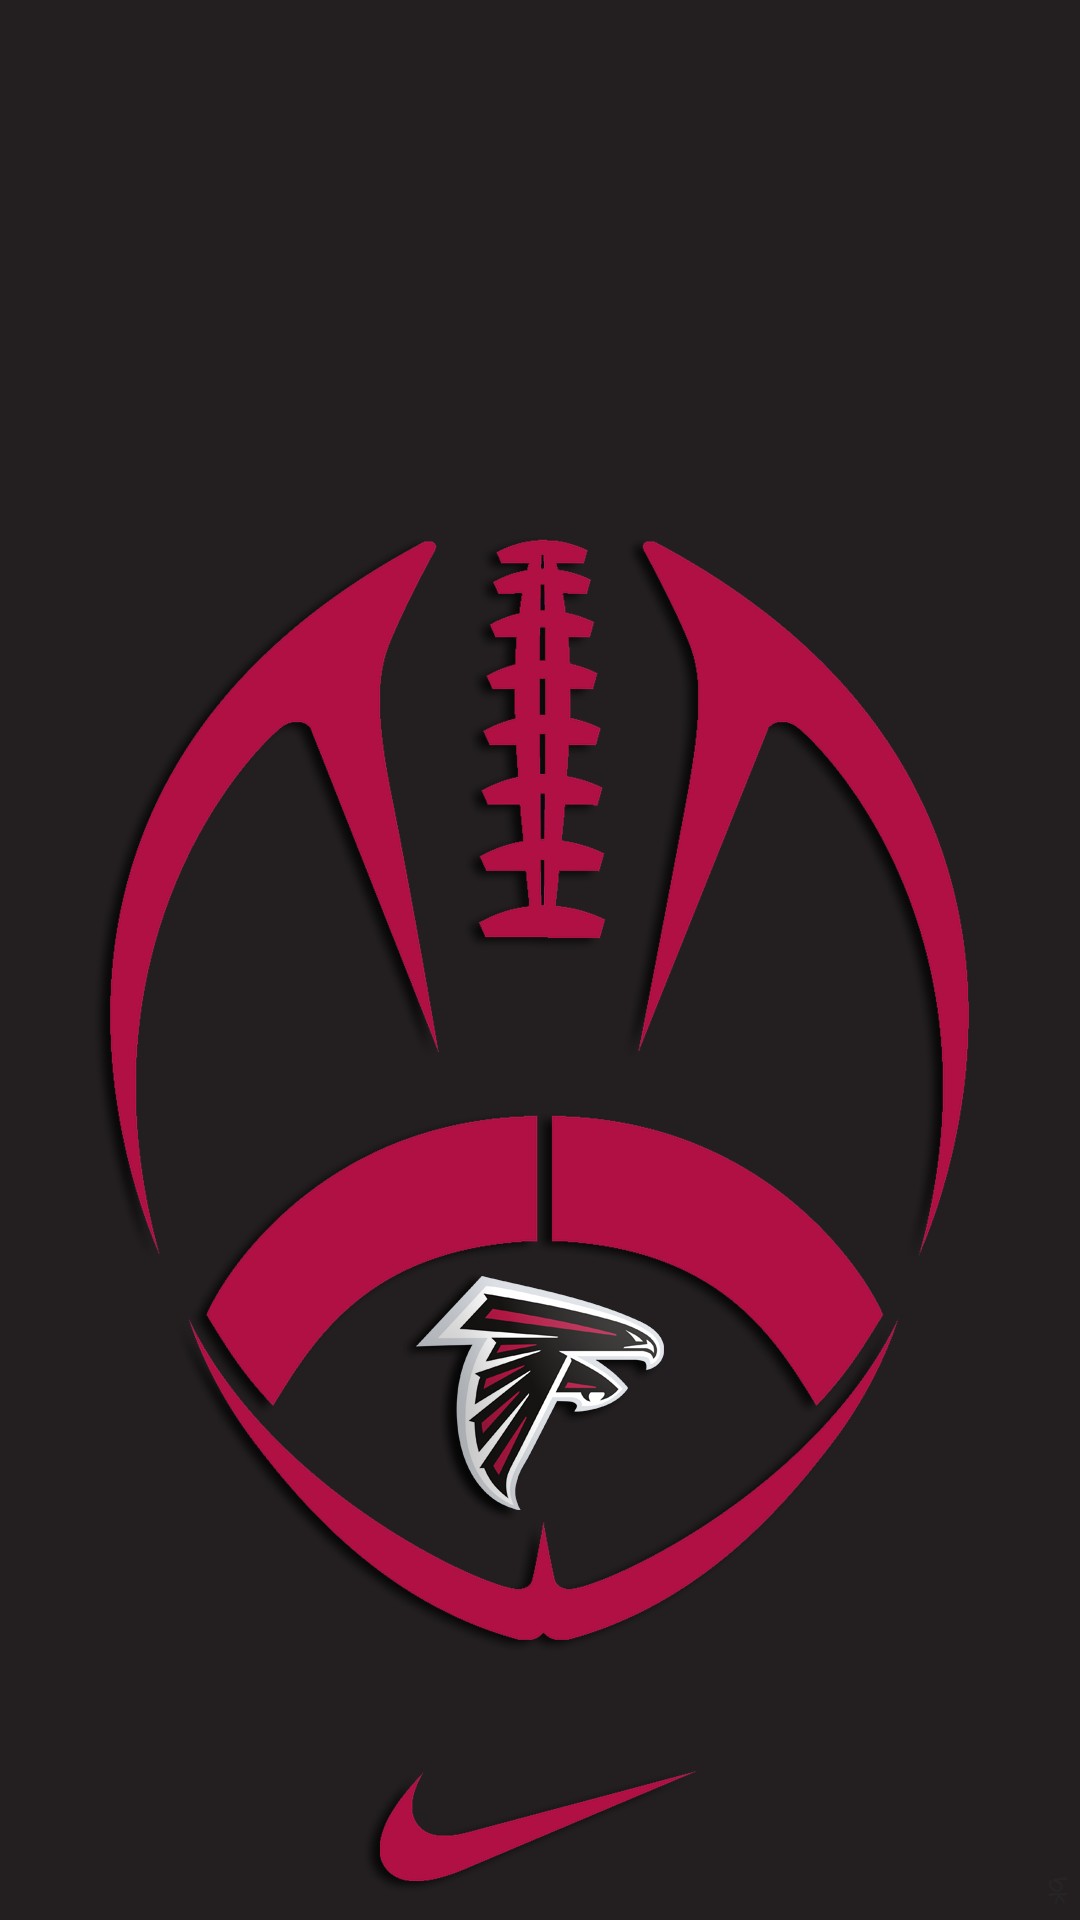 Atlanta Falcons iPhone Wallpaper New With high-resolution 1080X1920 pixel. Donwload and set as wallpaper for your iPhone X, iPhone XS home screen backgrounds, XS Max, XR, iPhone8 lock screen wallpaper, iPhone 7, 6, SE, and other mobile devices